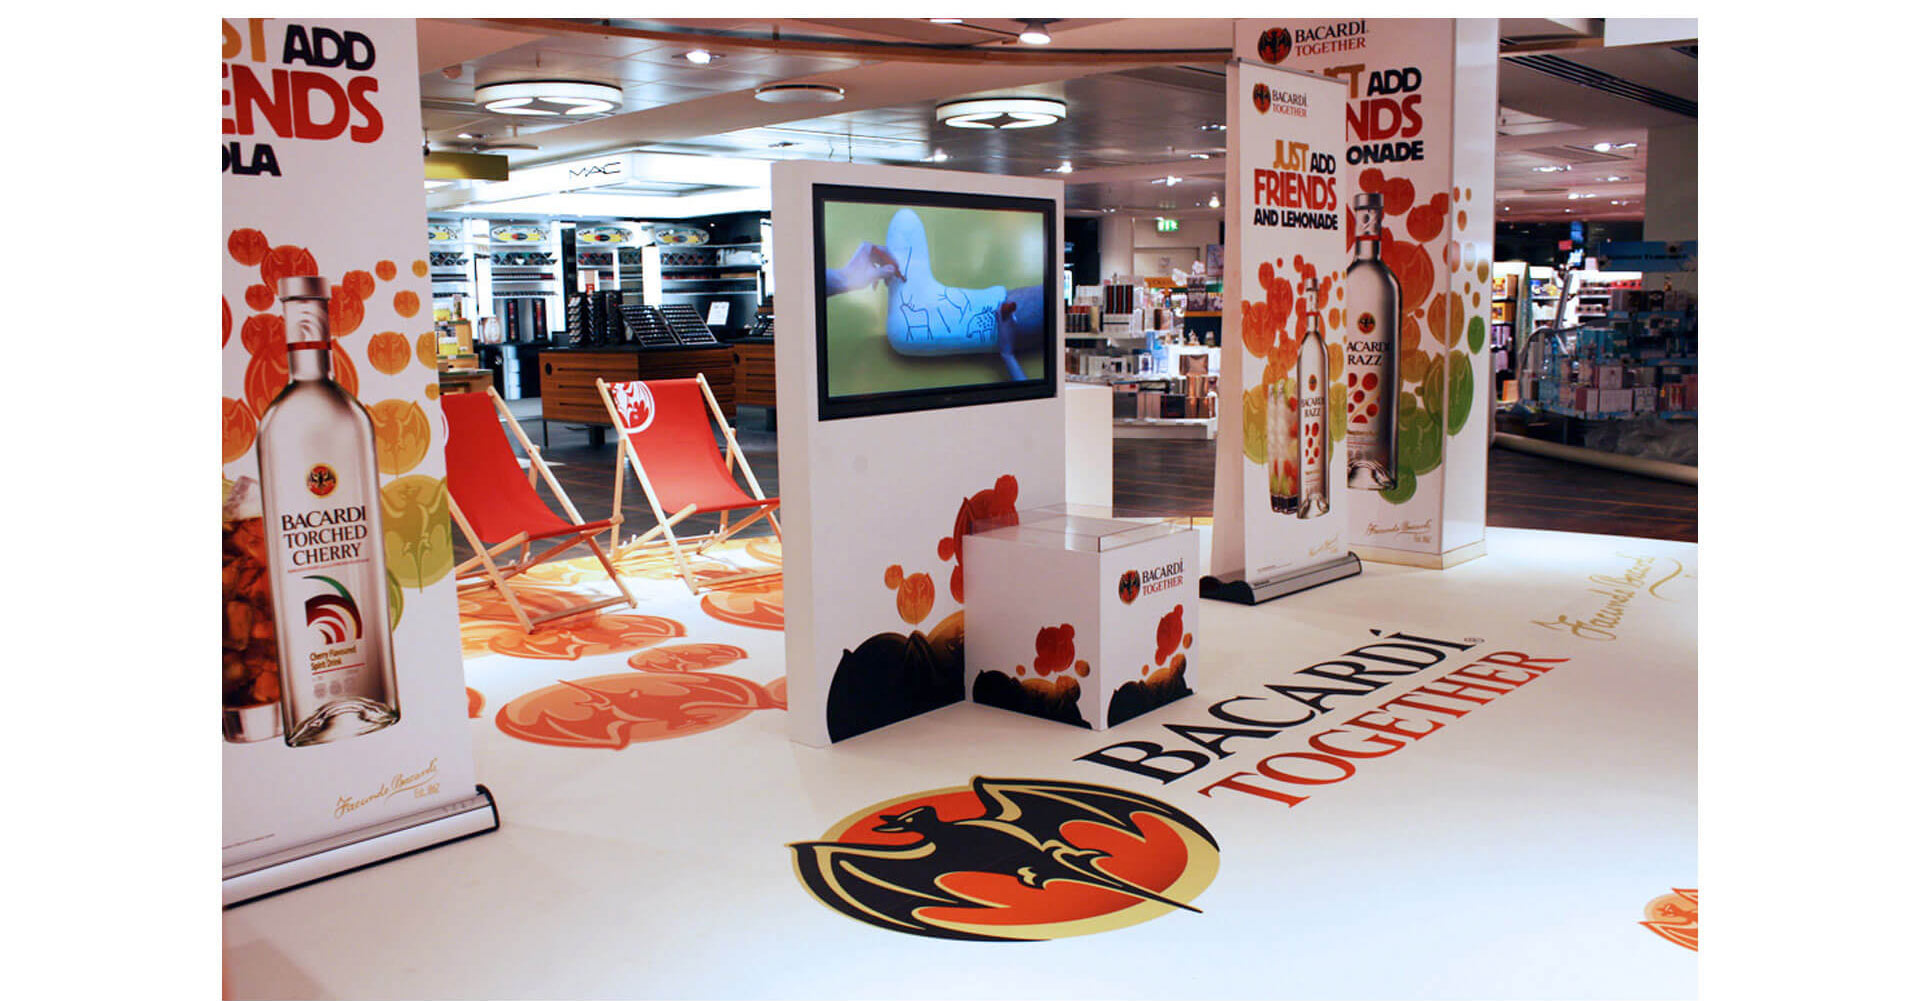 Bacardi Together brand identity duty free promotion campaigns for travel retail Copenhagen airport design